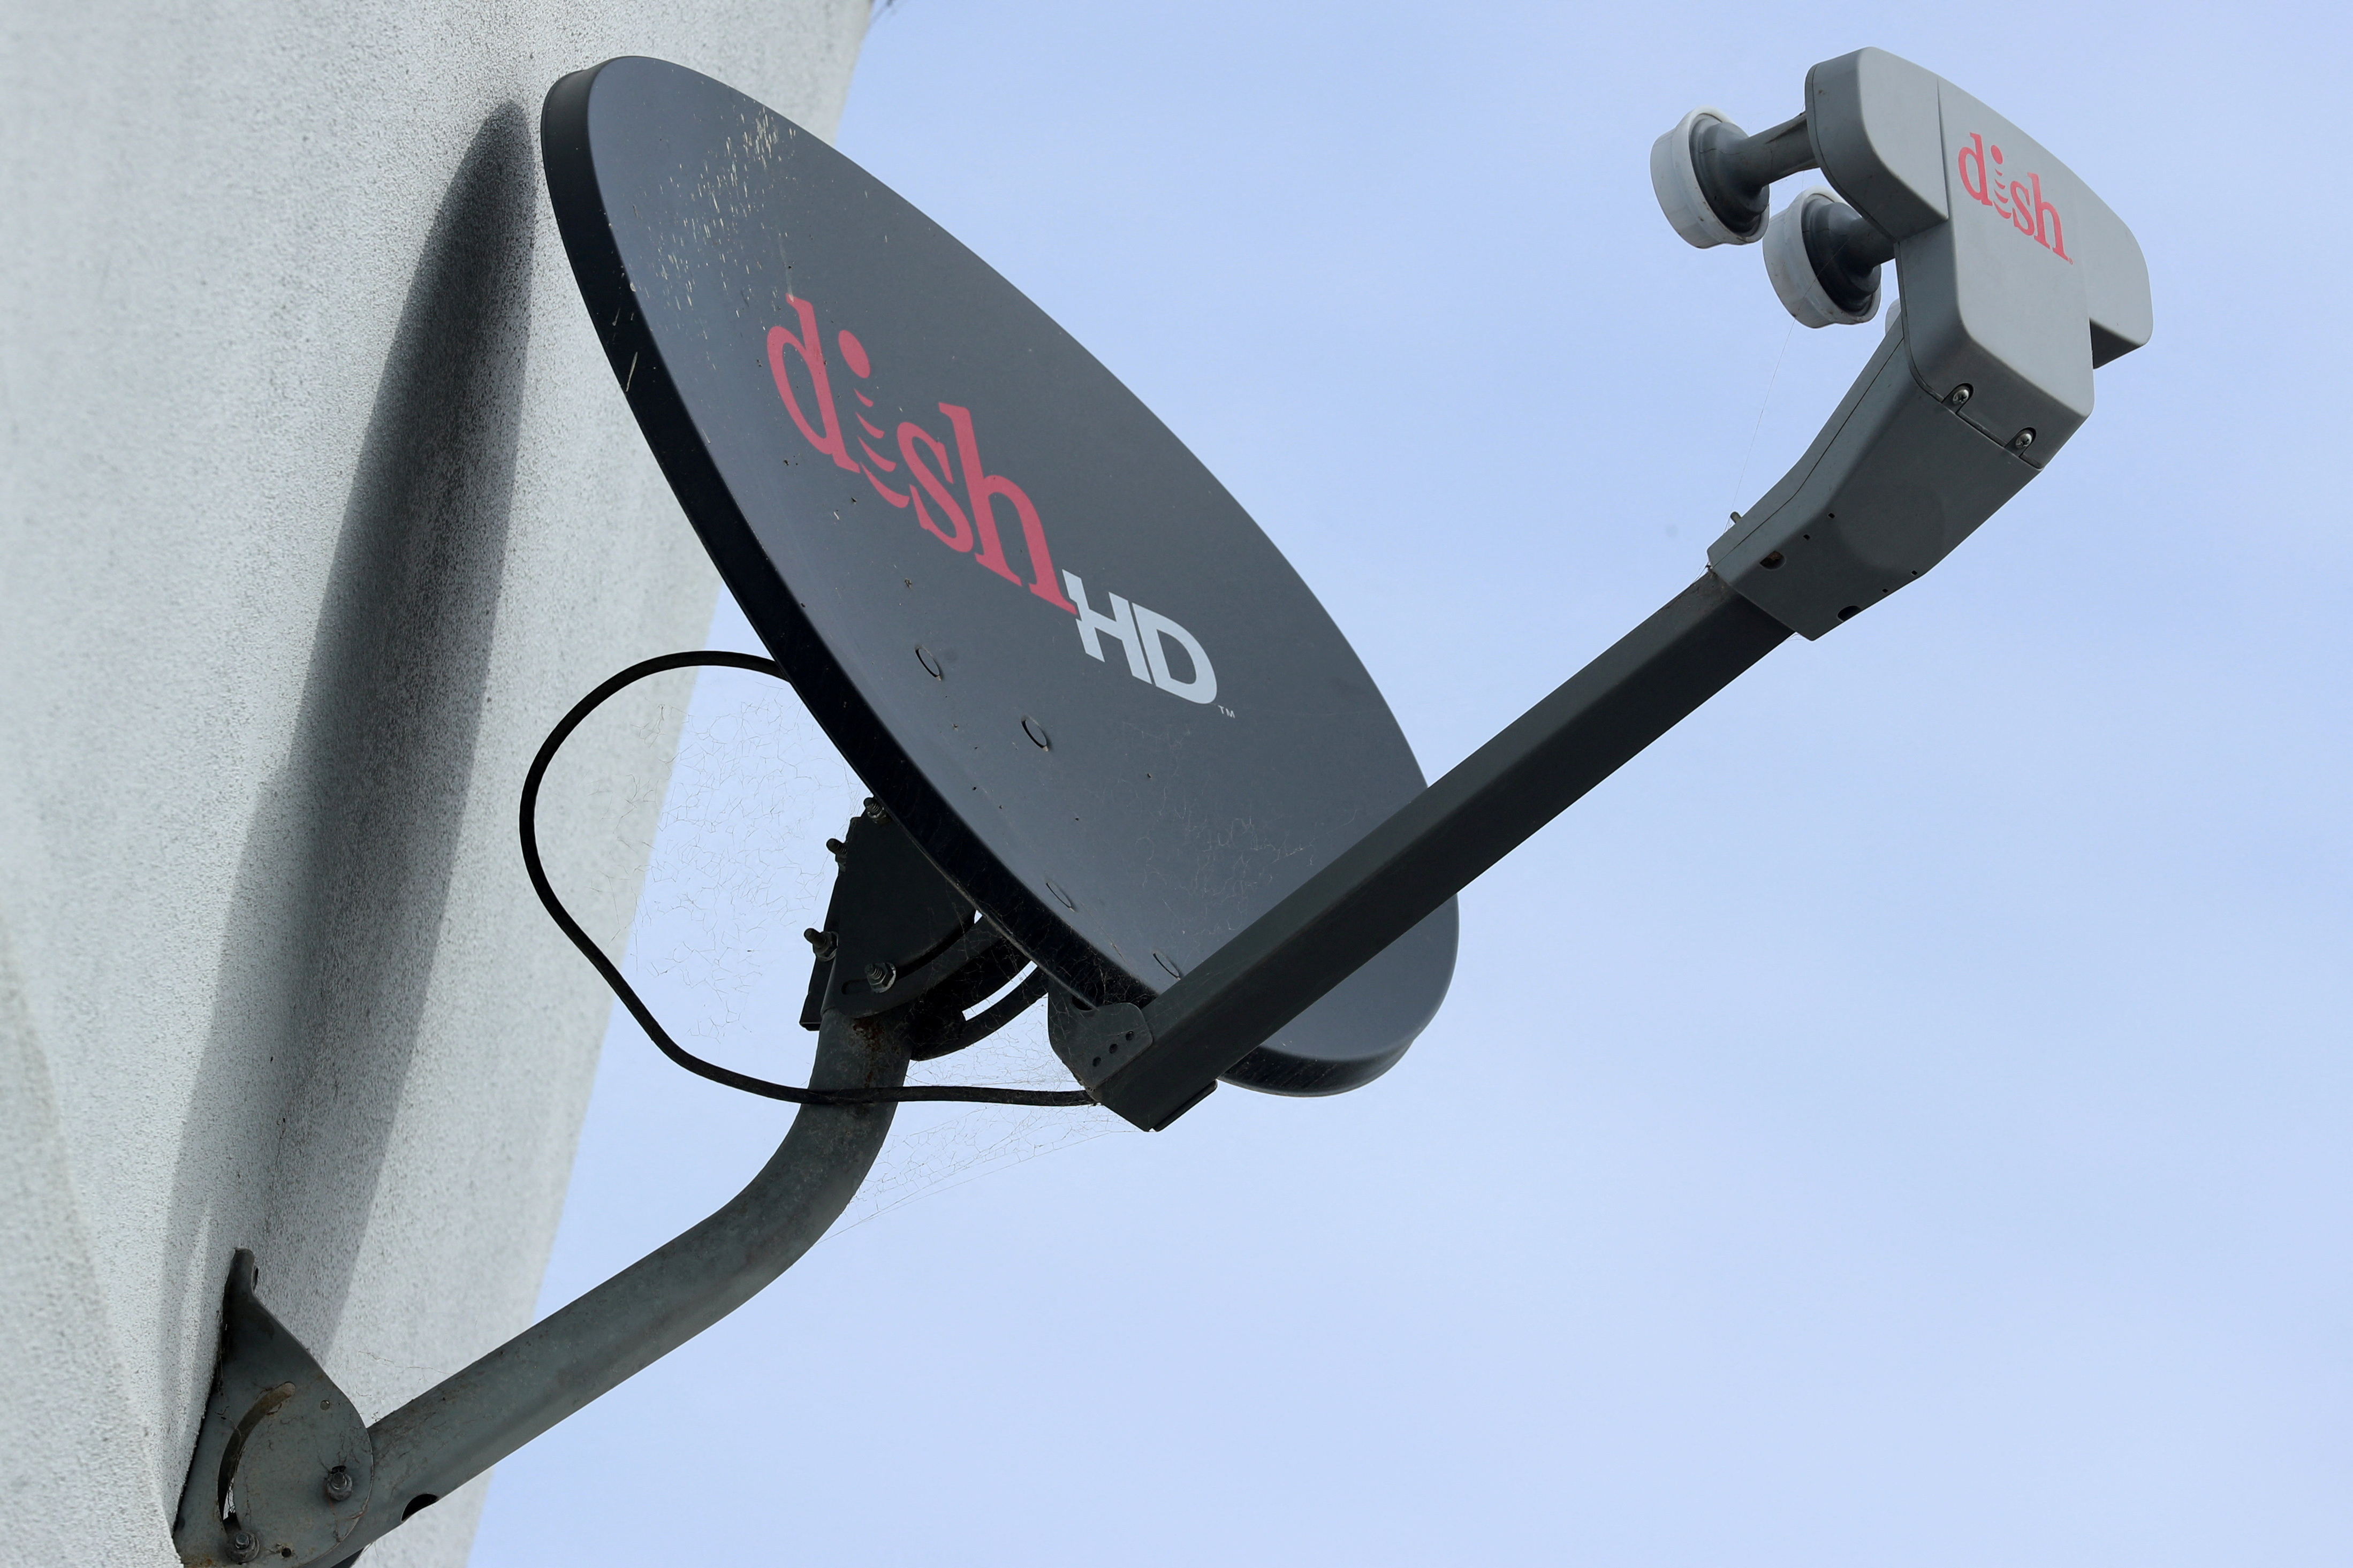 A Dish Network satellite dish is shown on a residential home in Encinitas, California